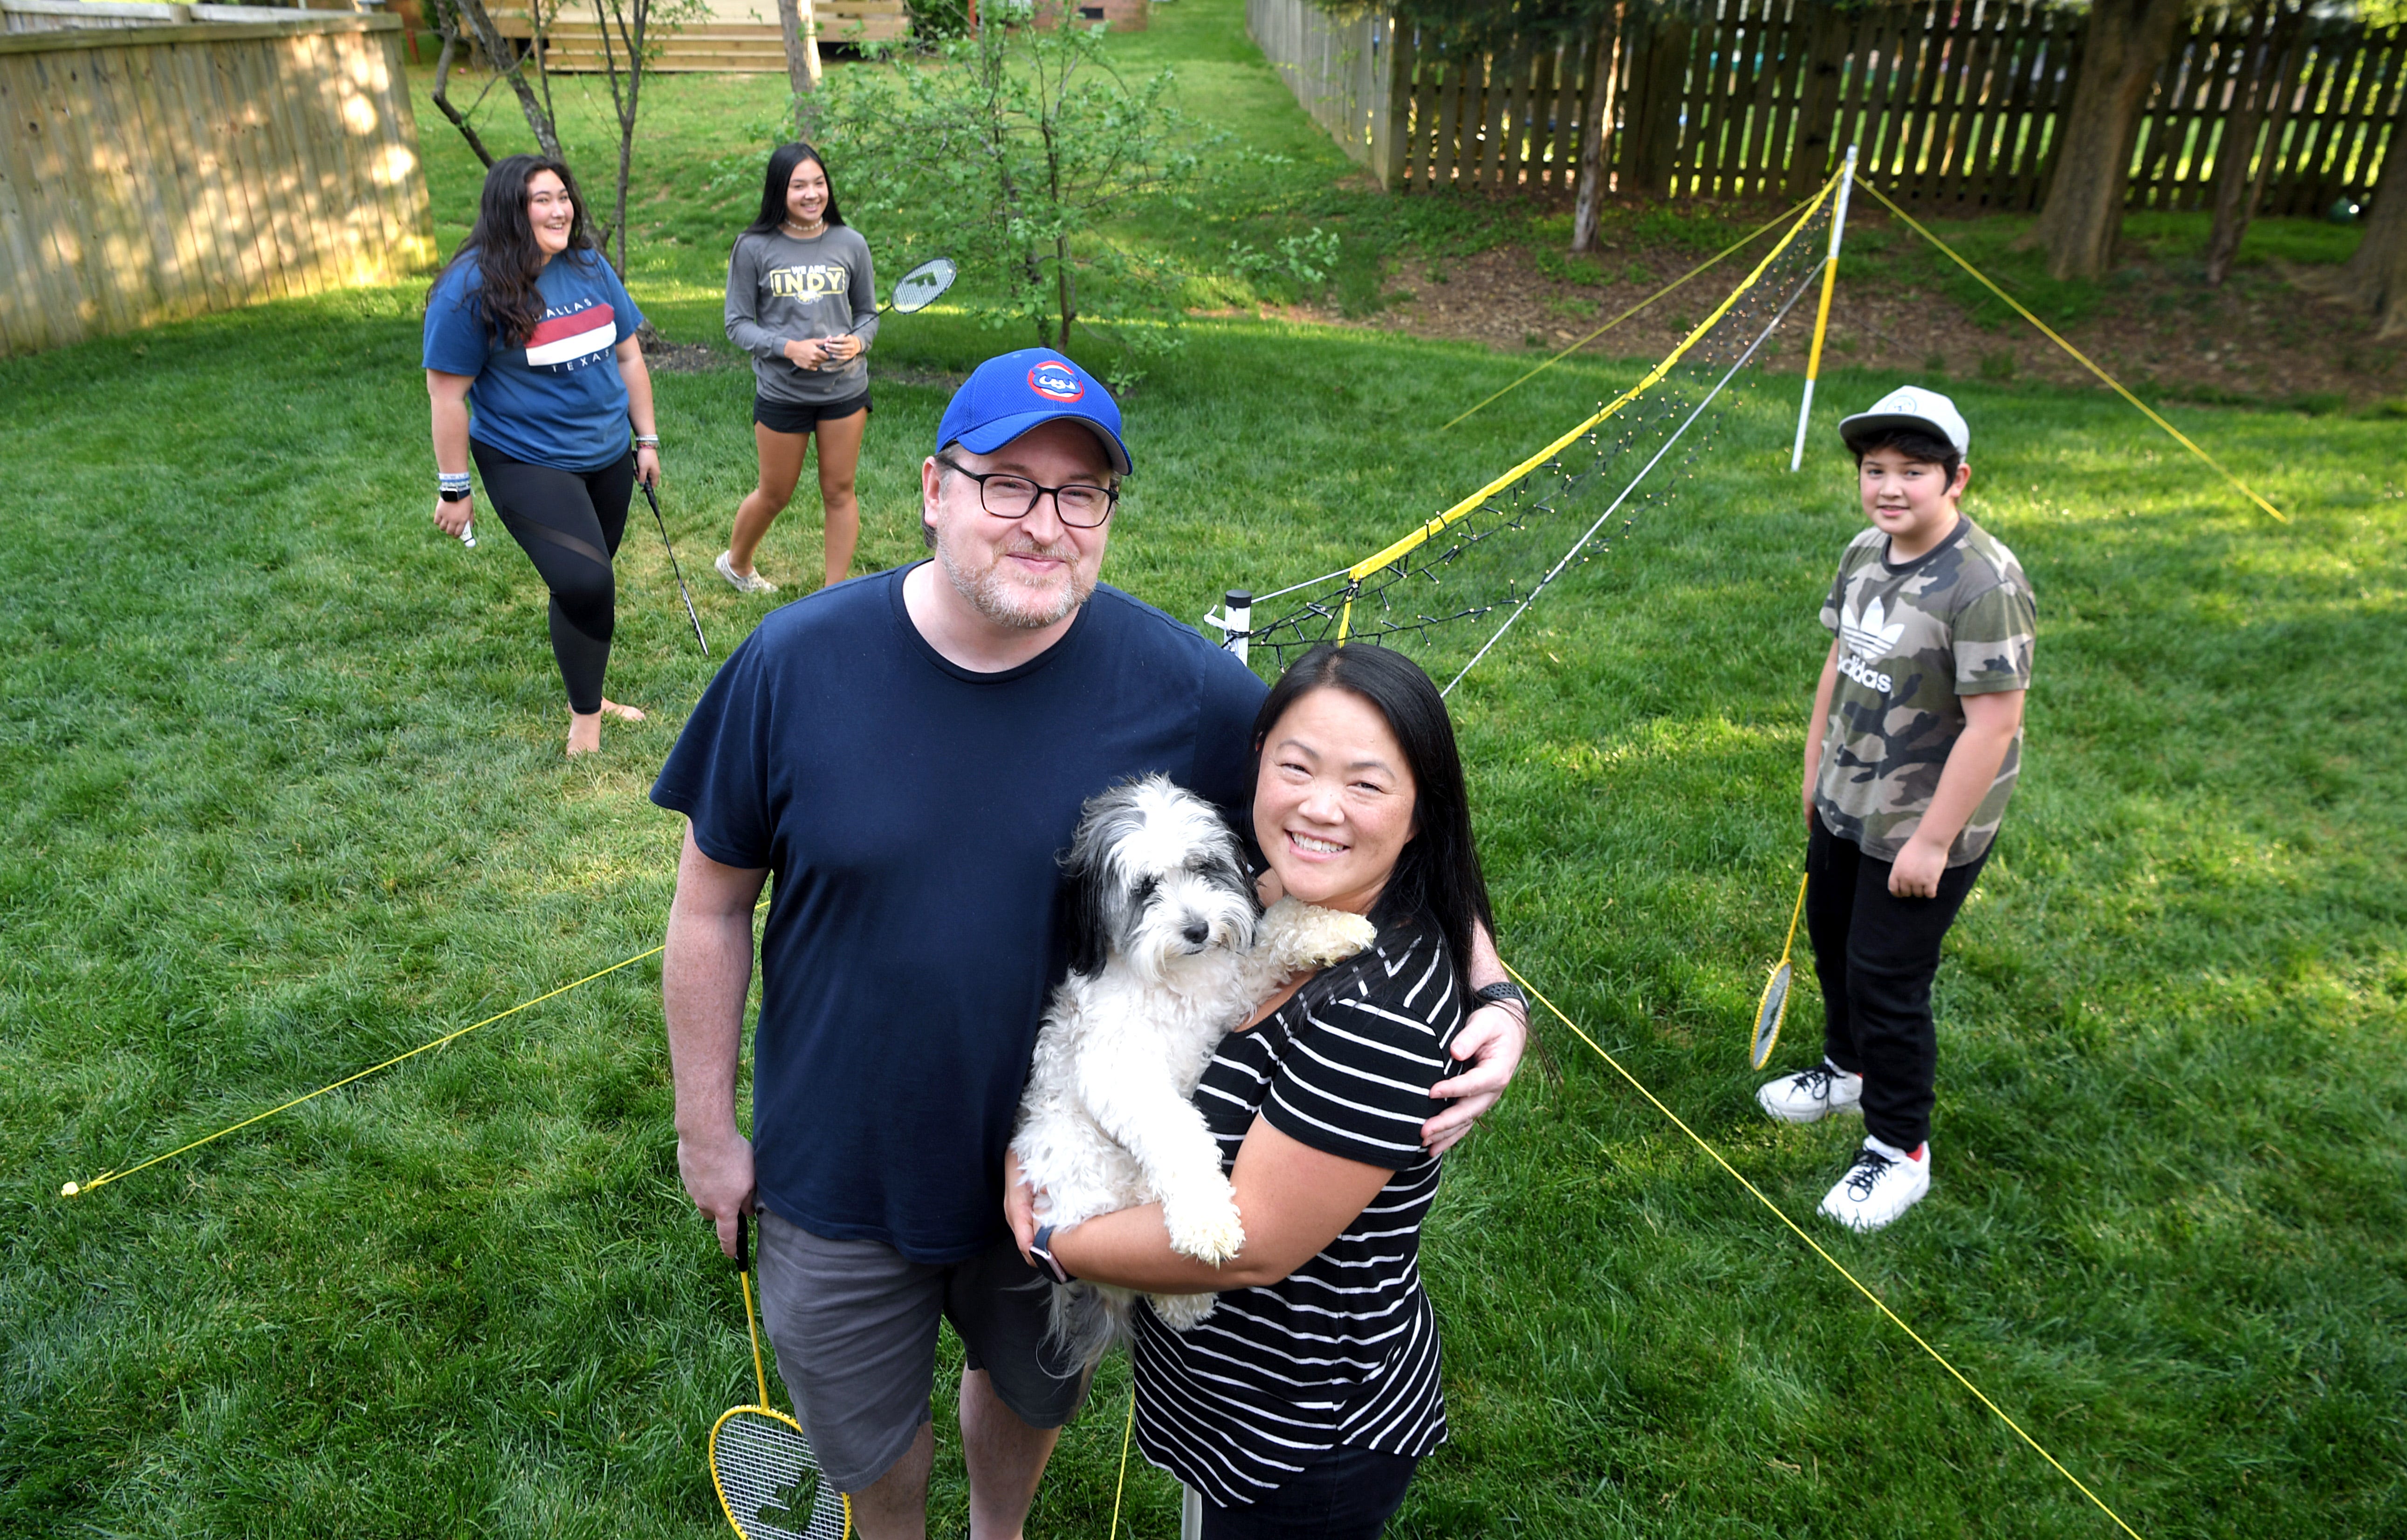 Franklin residents Rusty Mitchell, a product designer at Mercury Intermedia, and Sunny Mitchell, attendance secretary at Legacy Middle School, and their children, Brook, Hanna and Isaac, have turned their backyard into a badminton court.